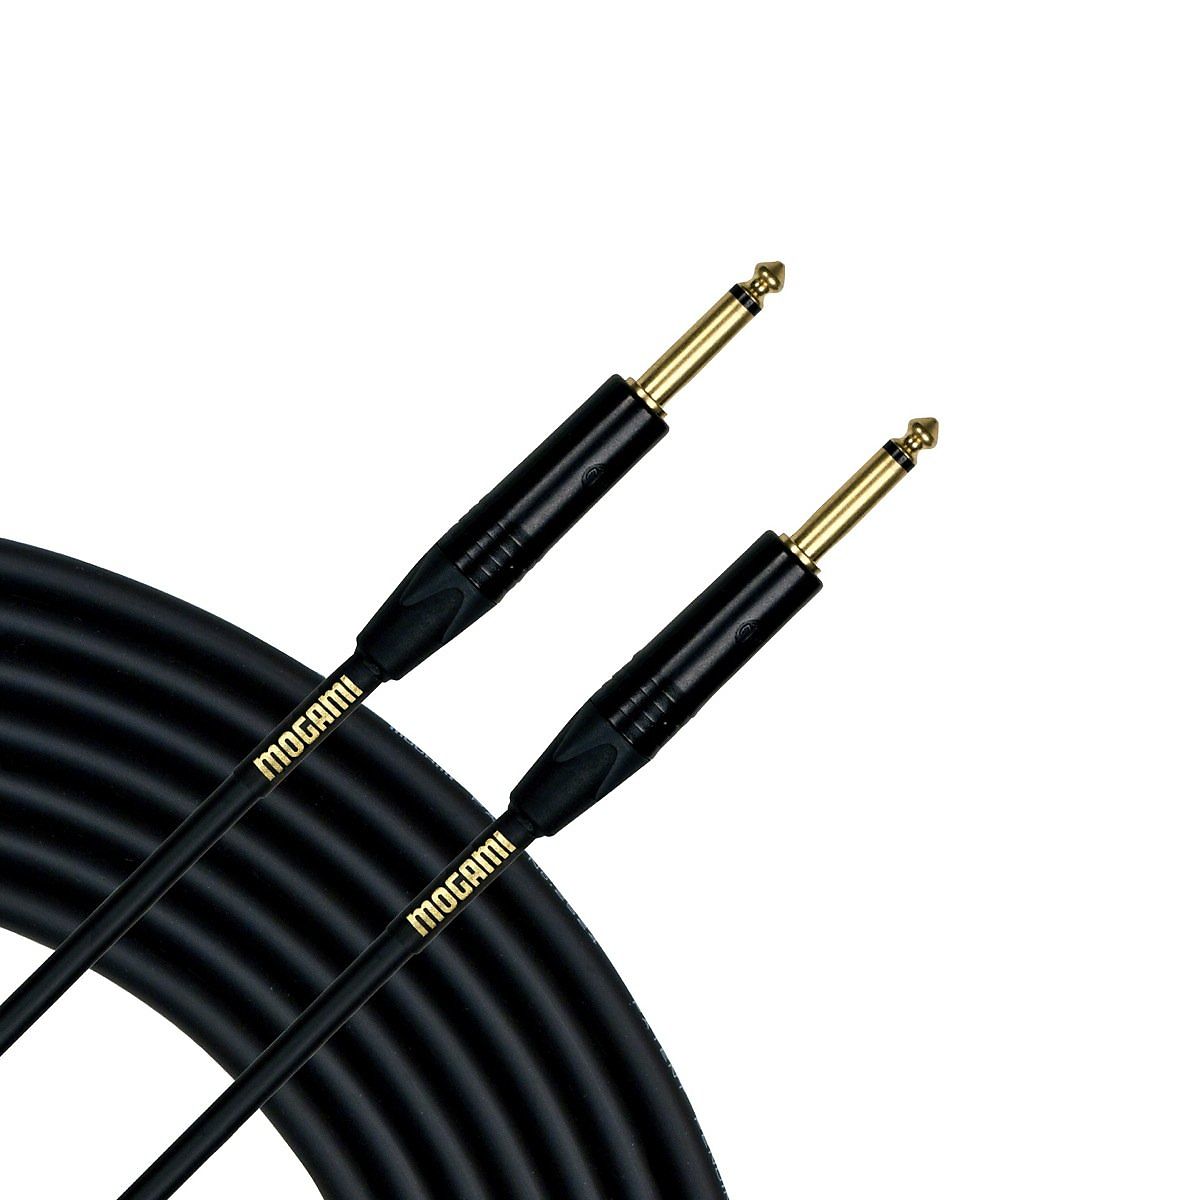 Mogami Gold Guitar/Instrument Cable, 25 Foot